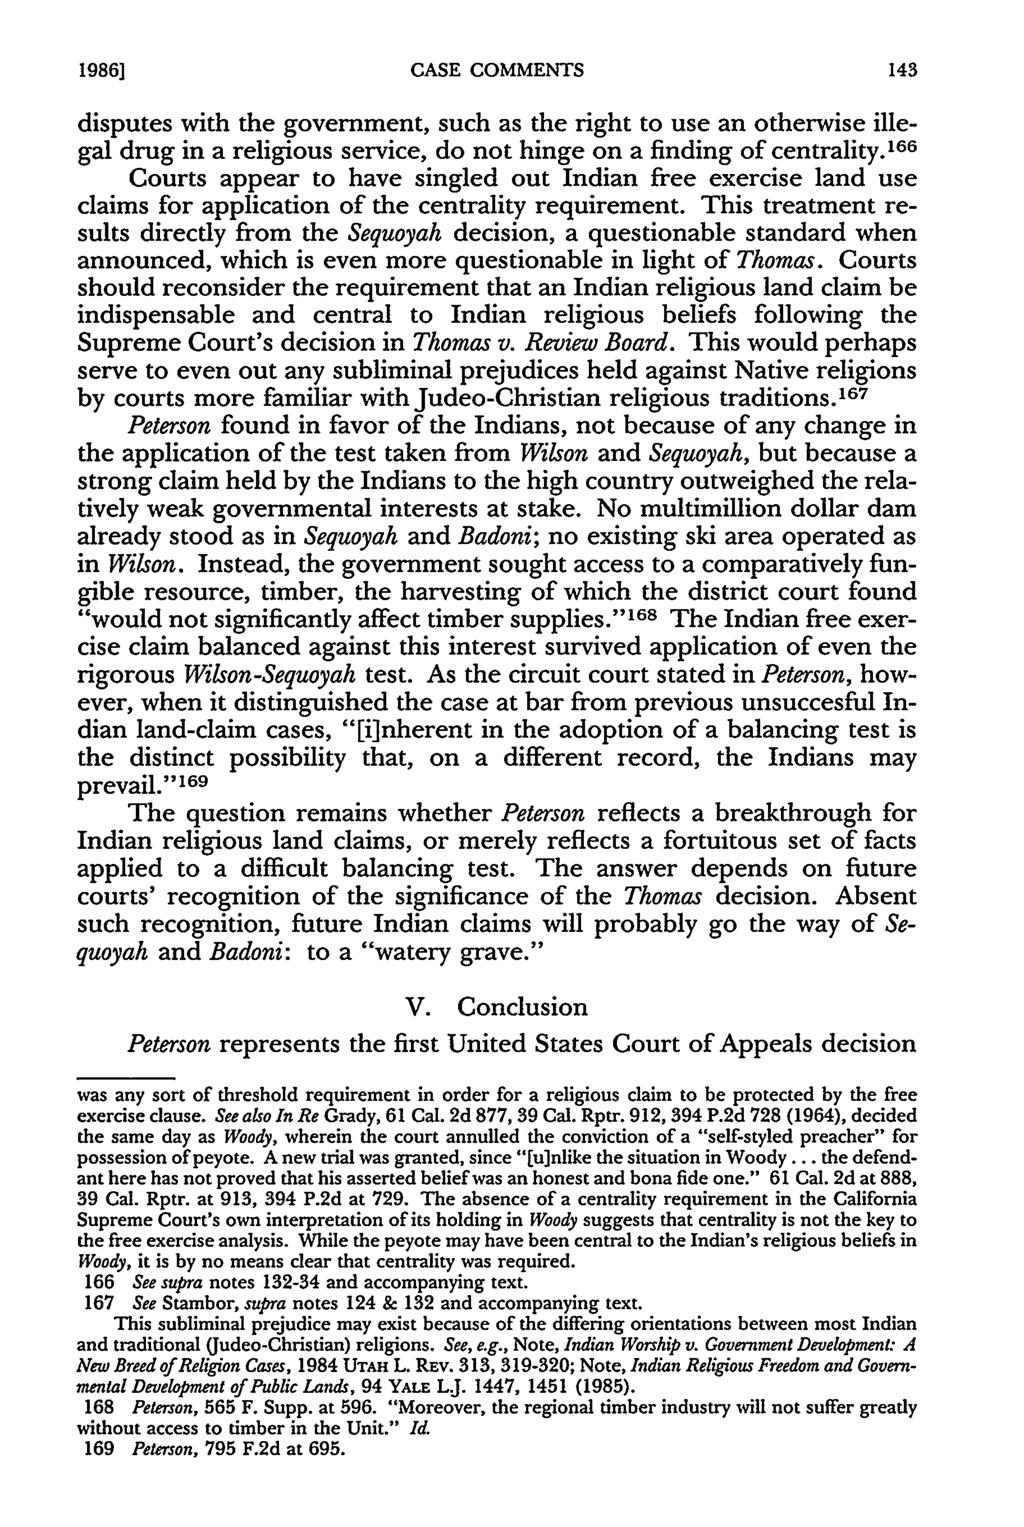 19861 CASE COMMENTS disputes with the government, such as the right to use an otherwise illegal drug in a religious service, do not hinge on a finding of centrality.